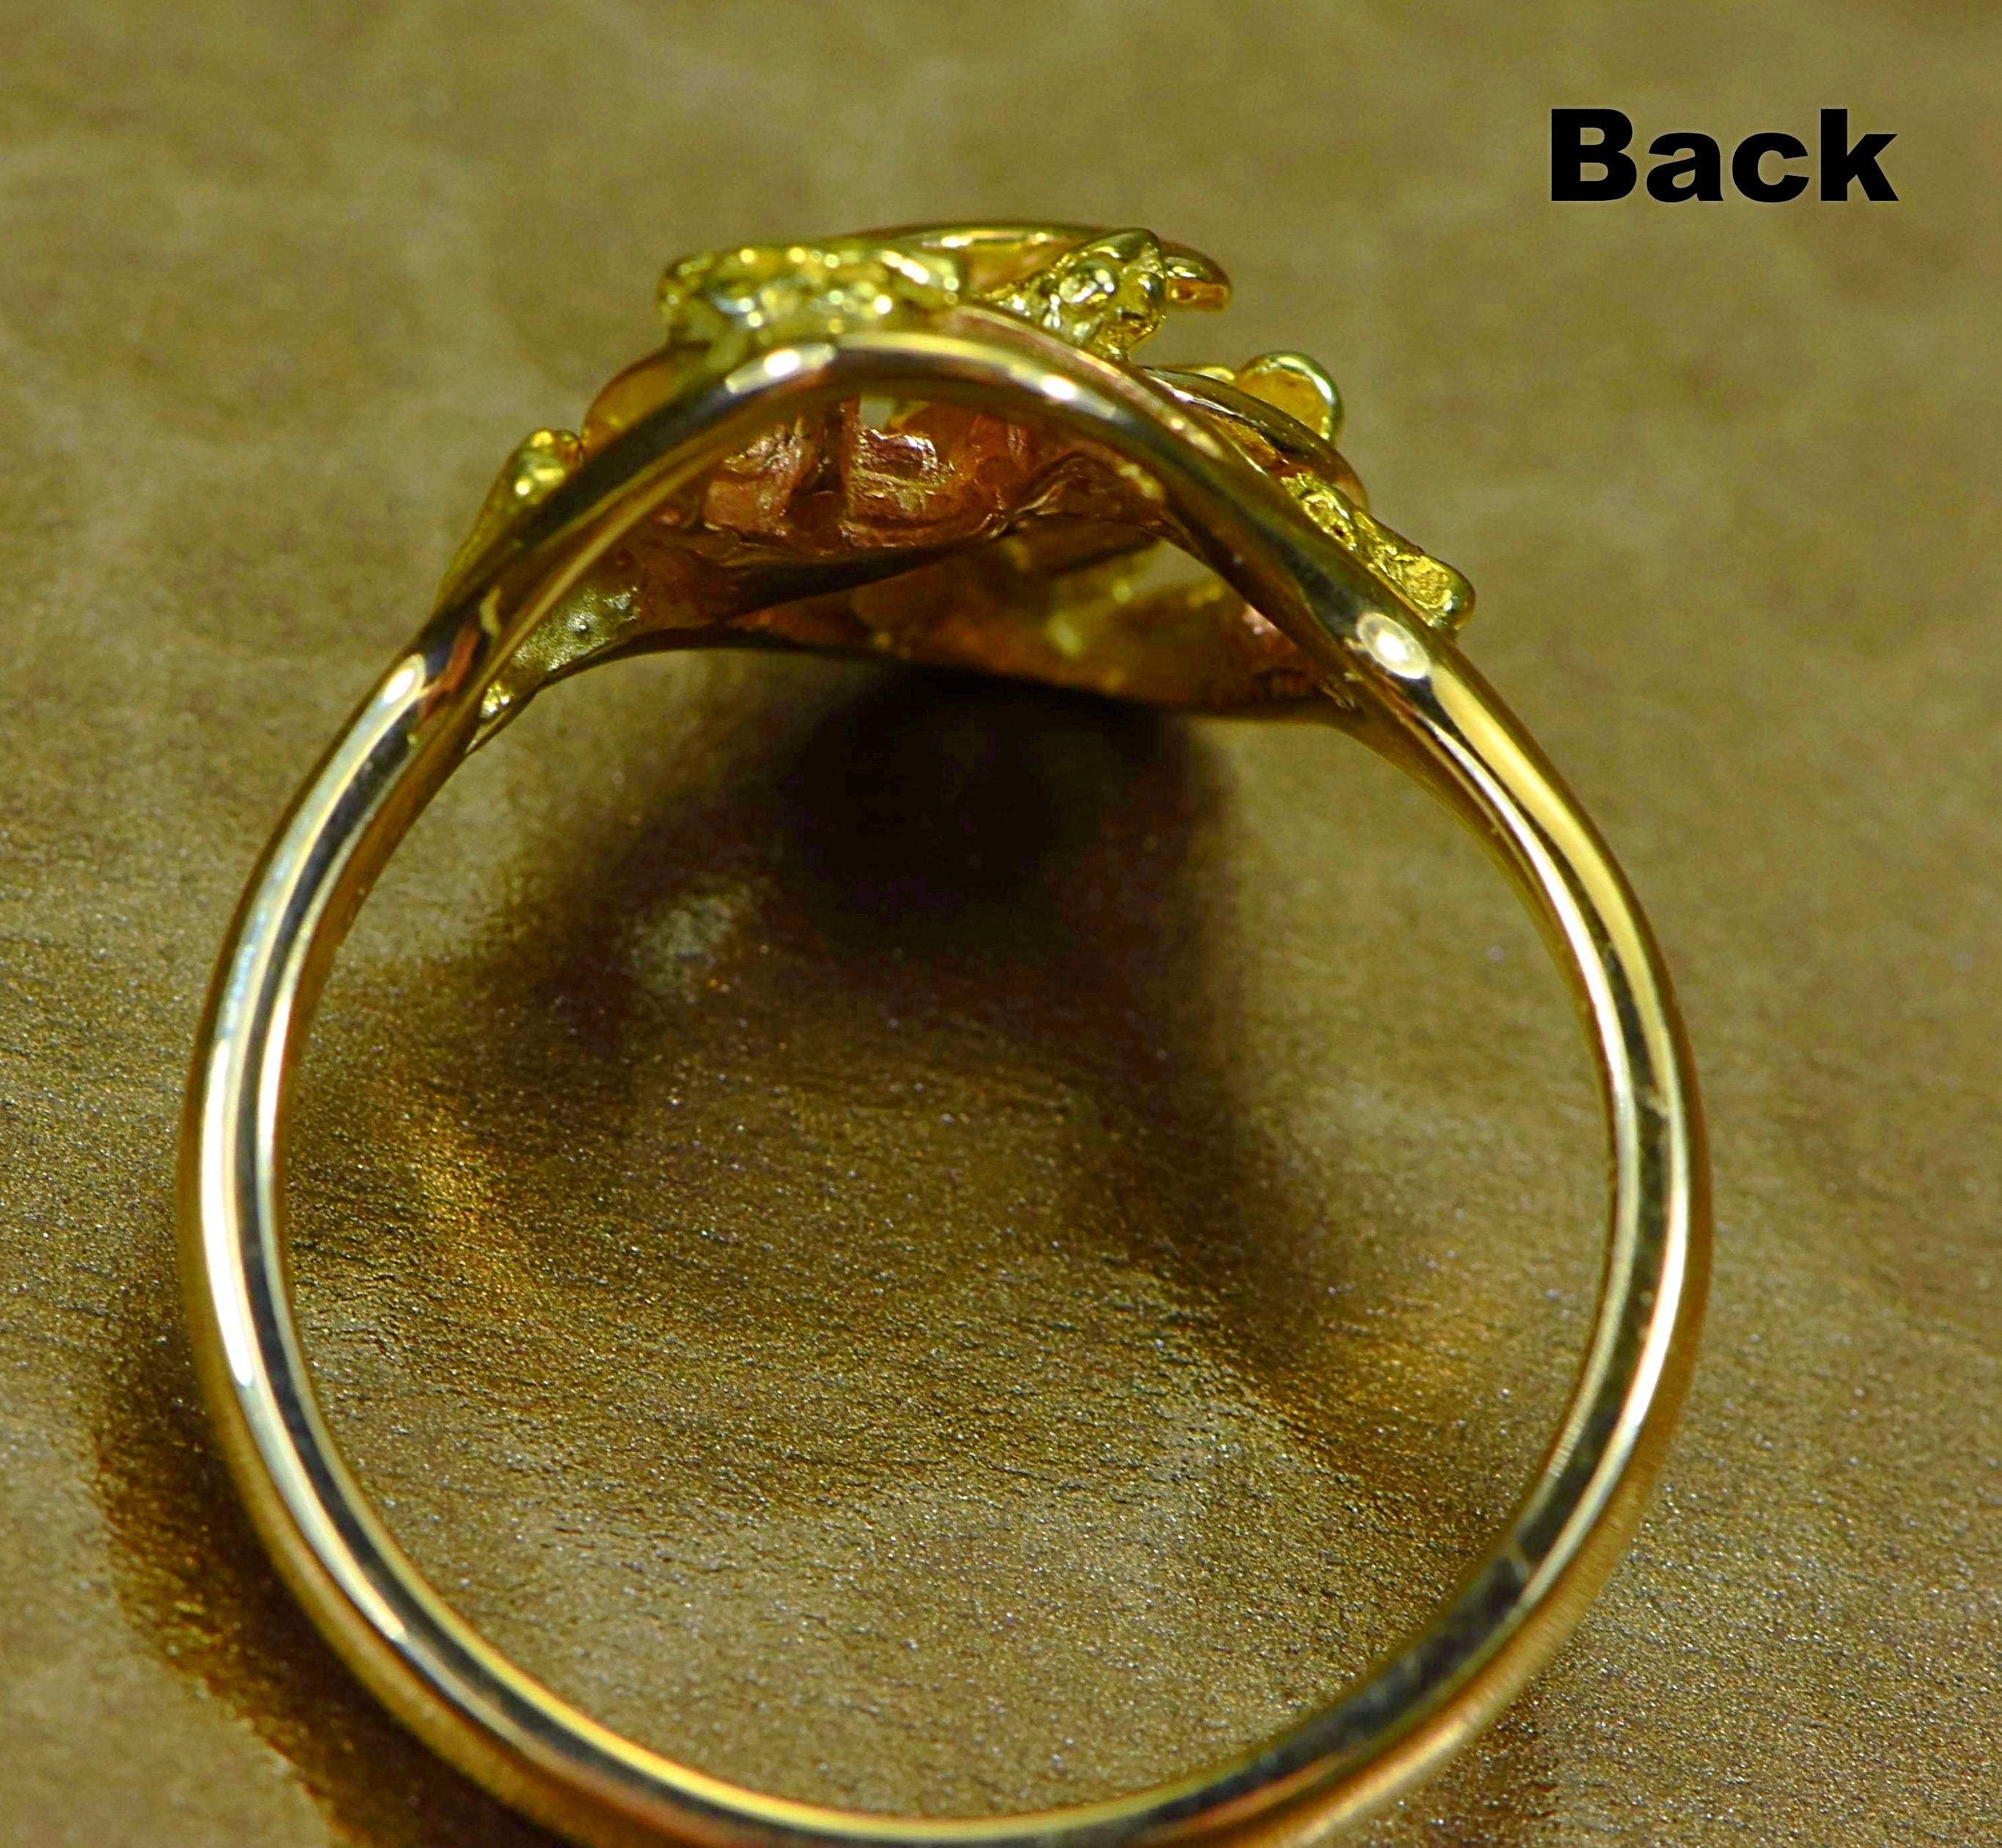 Gold Nugget Ladies Ring "Orocal" RL254 Genuine Hand Crafted Jewelry - 14K Casting